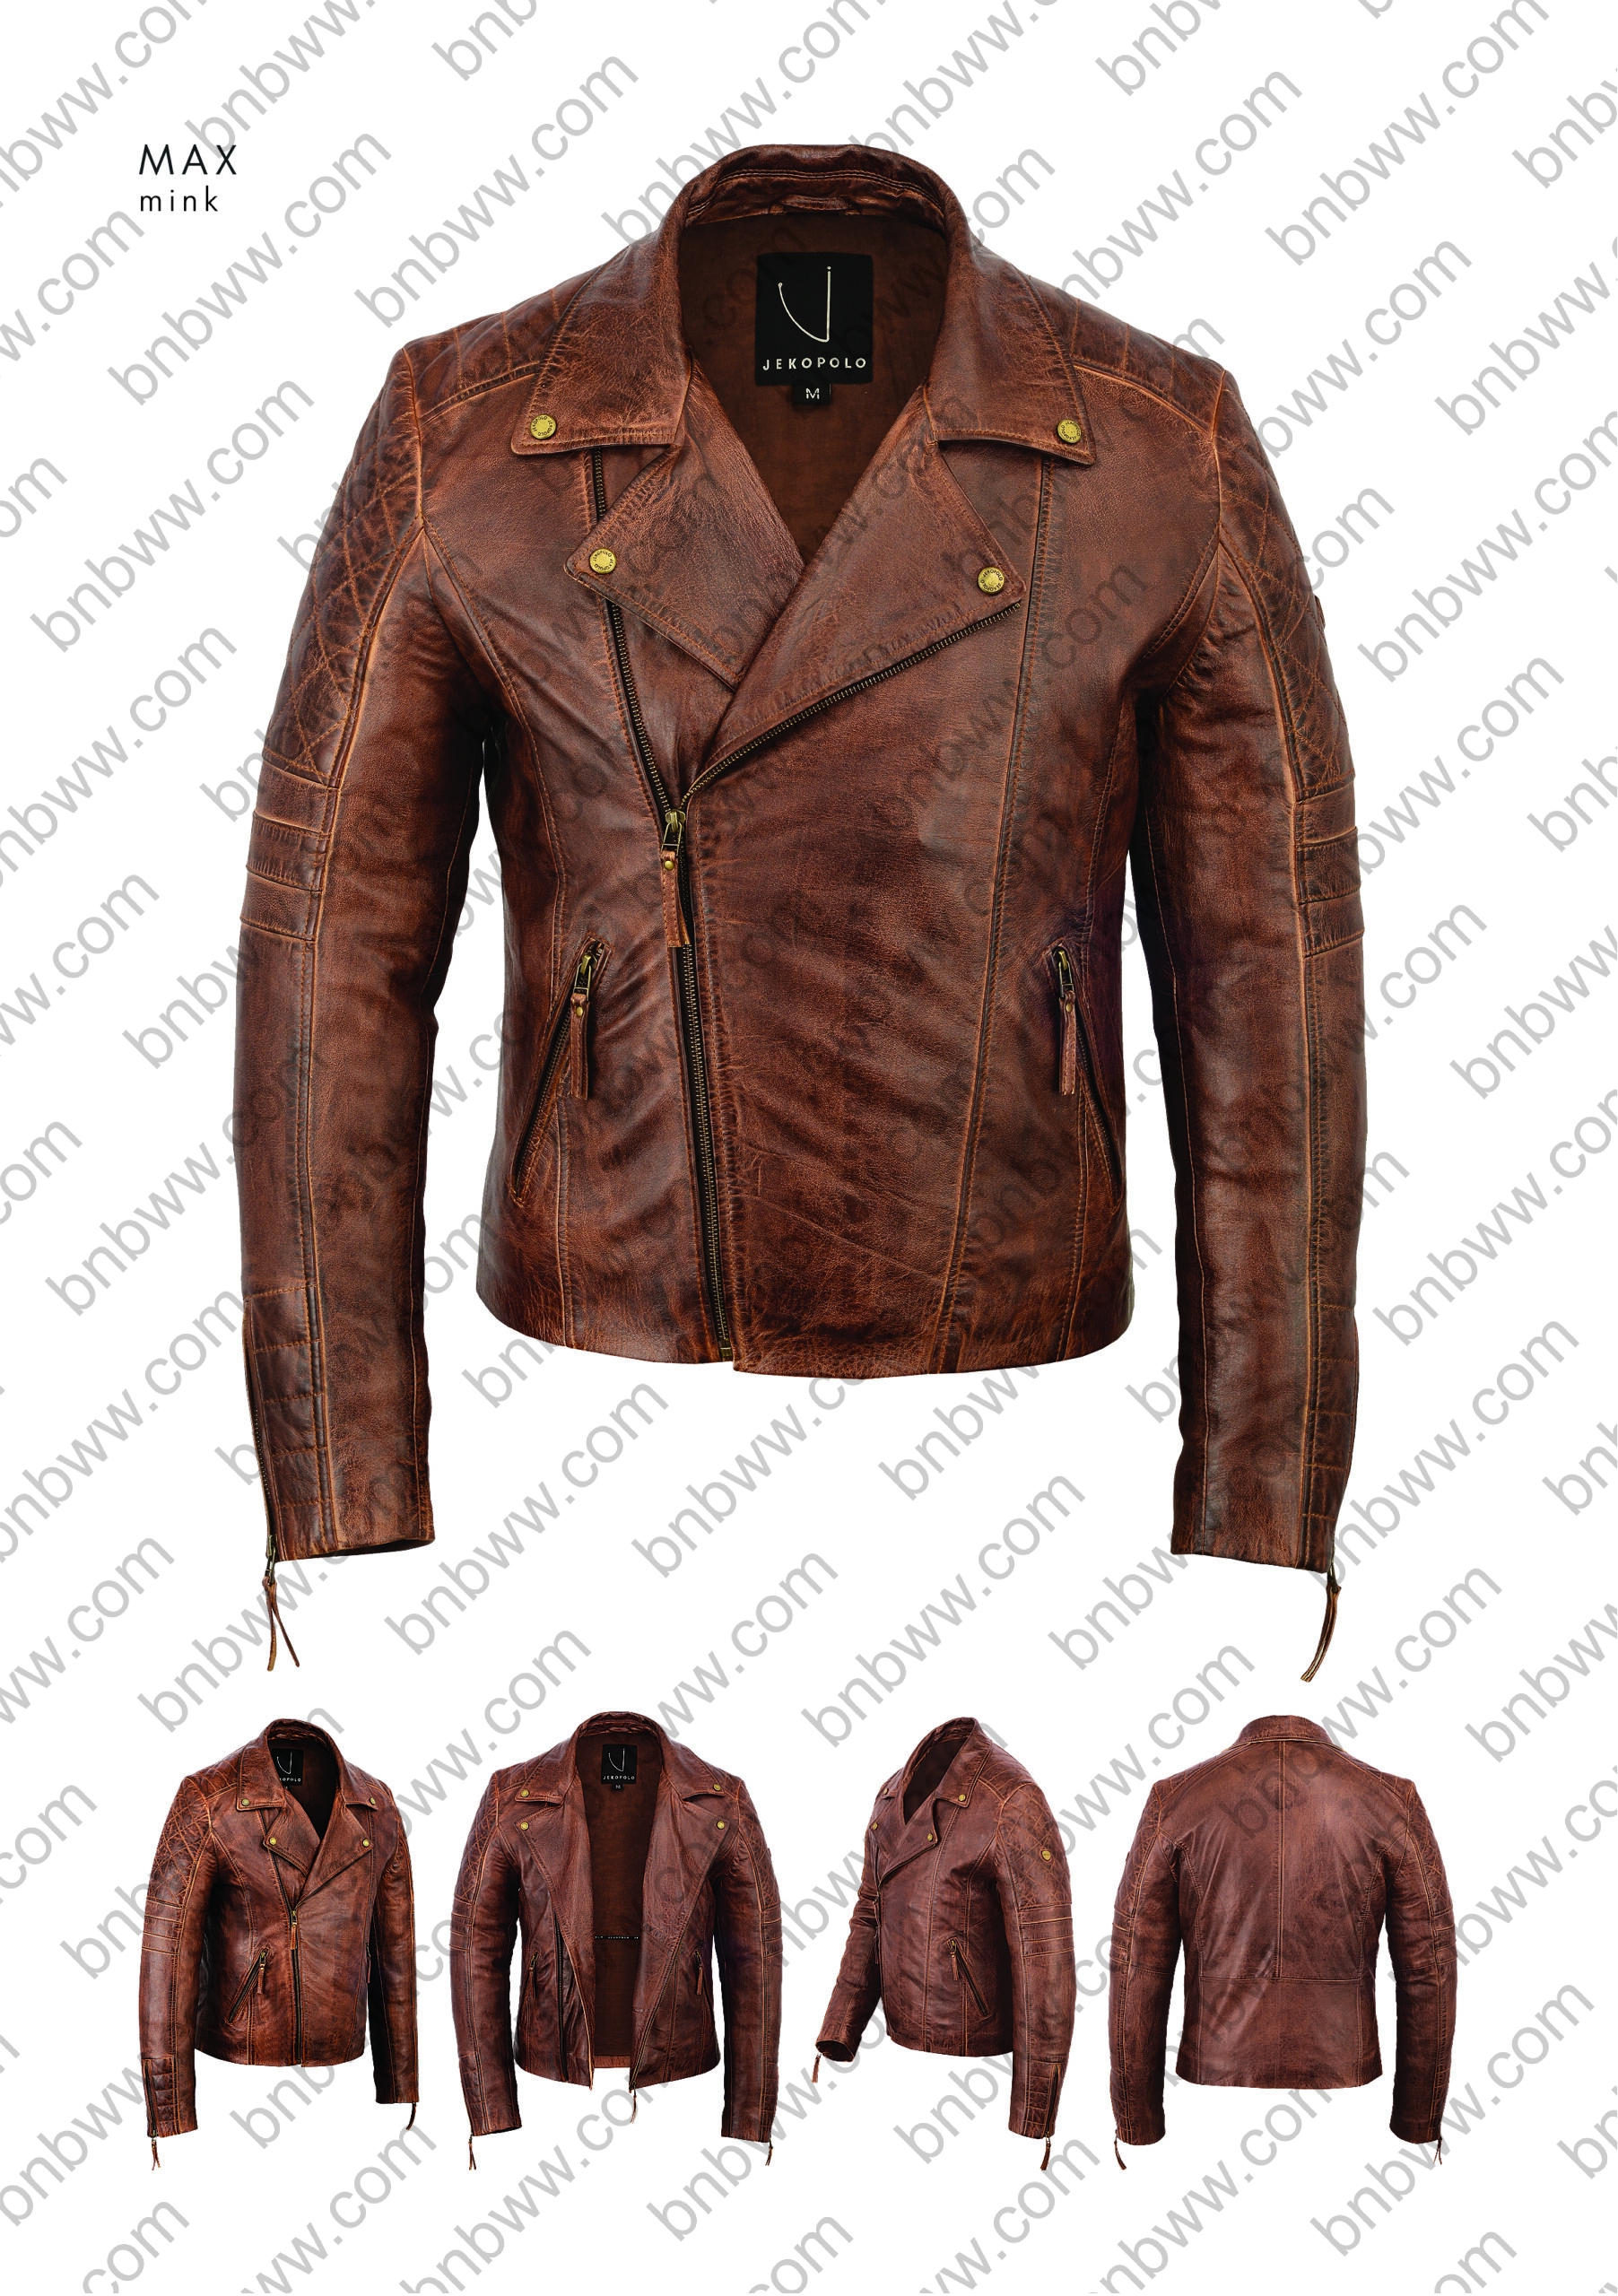 MAX-Leather jacket for Men